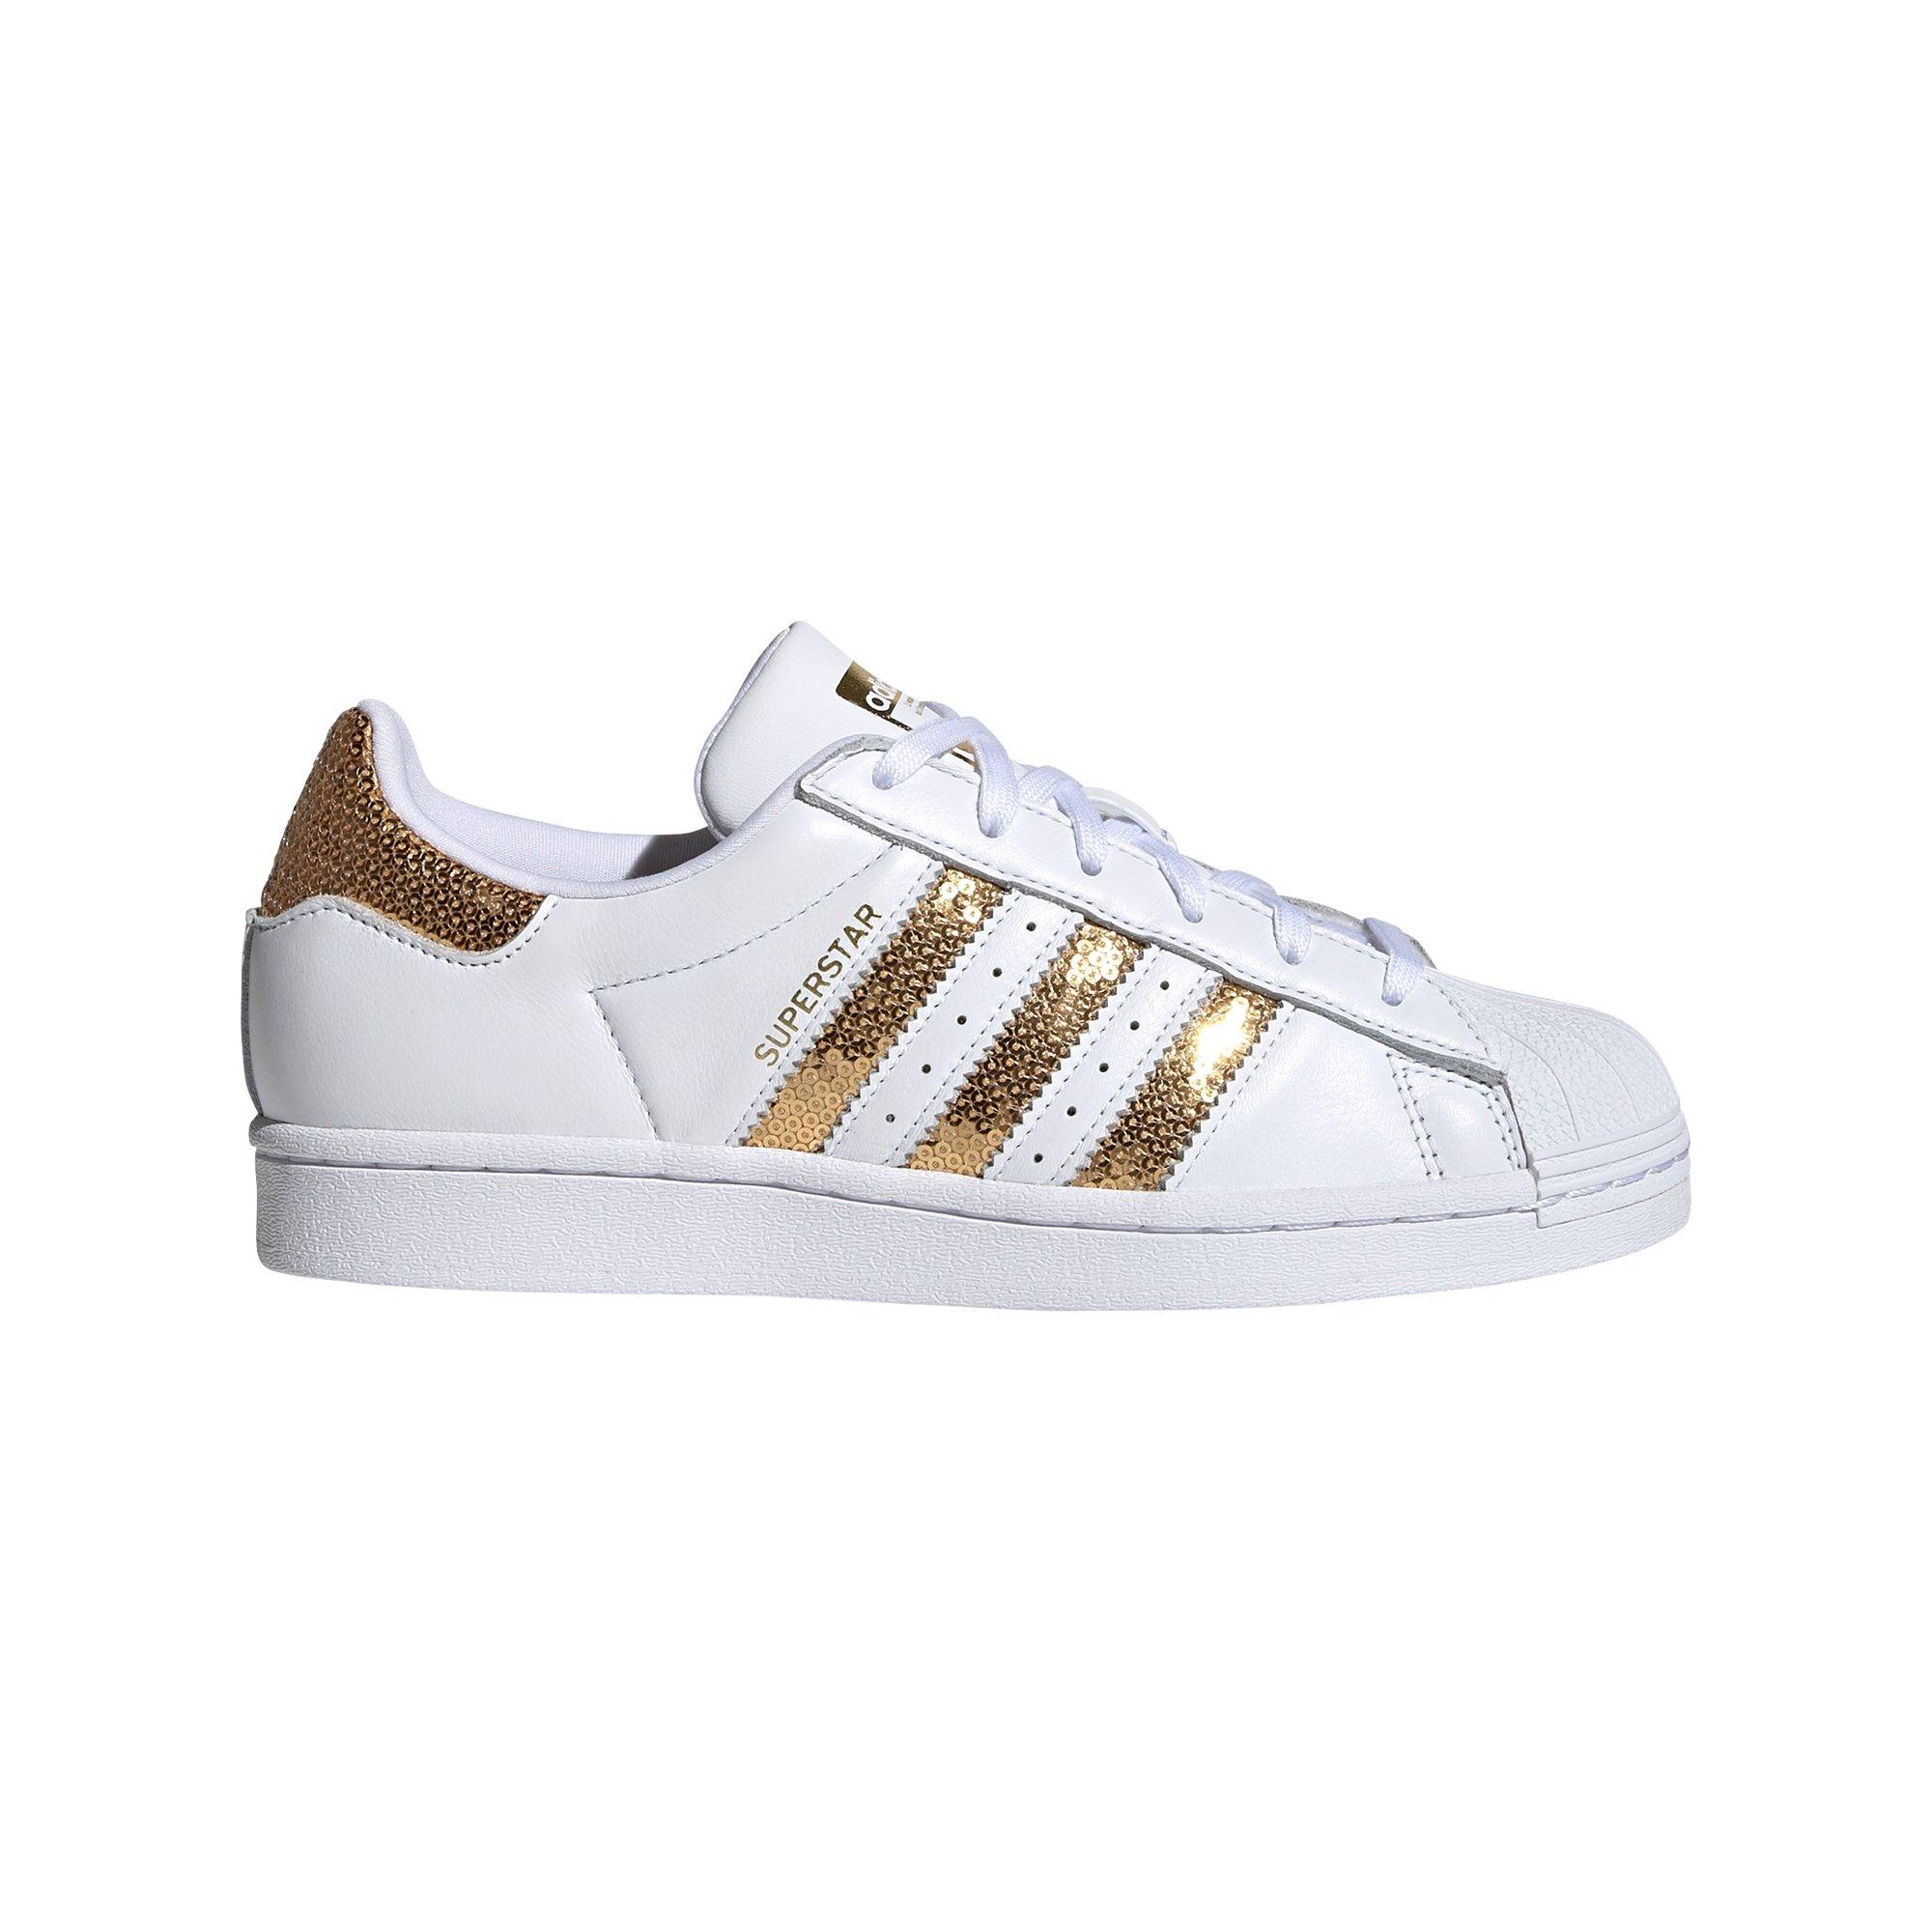 white adidas shoes with gold stripes